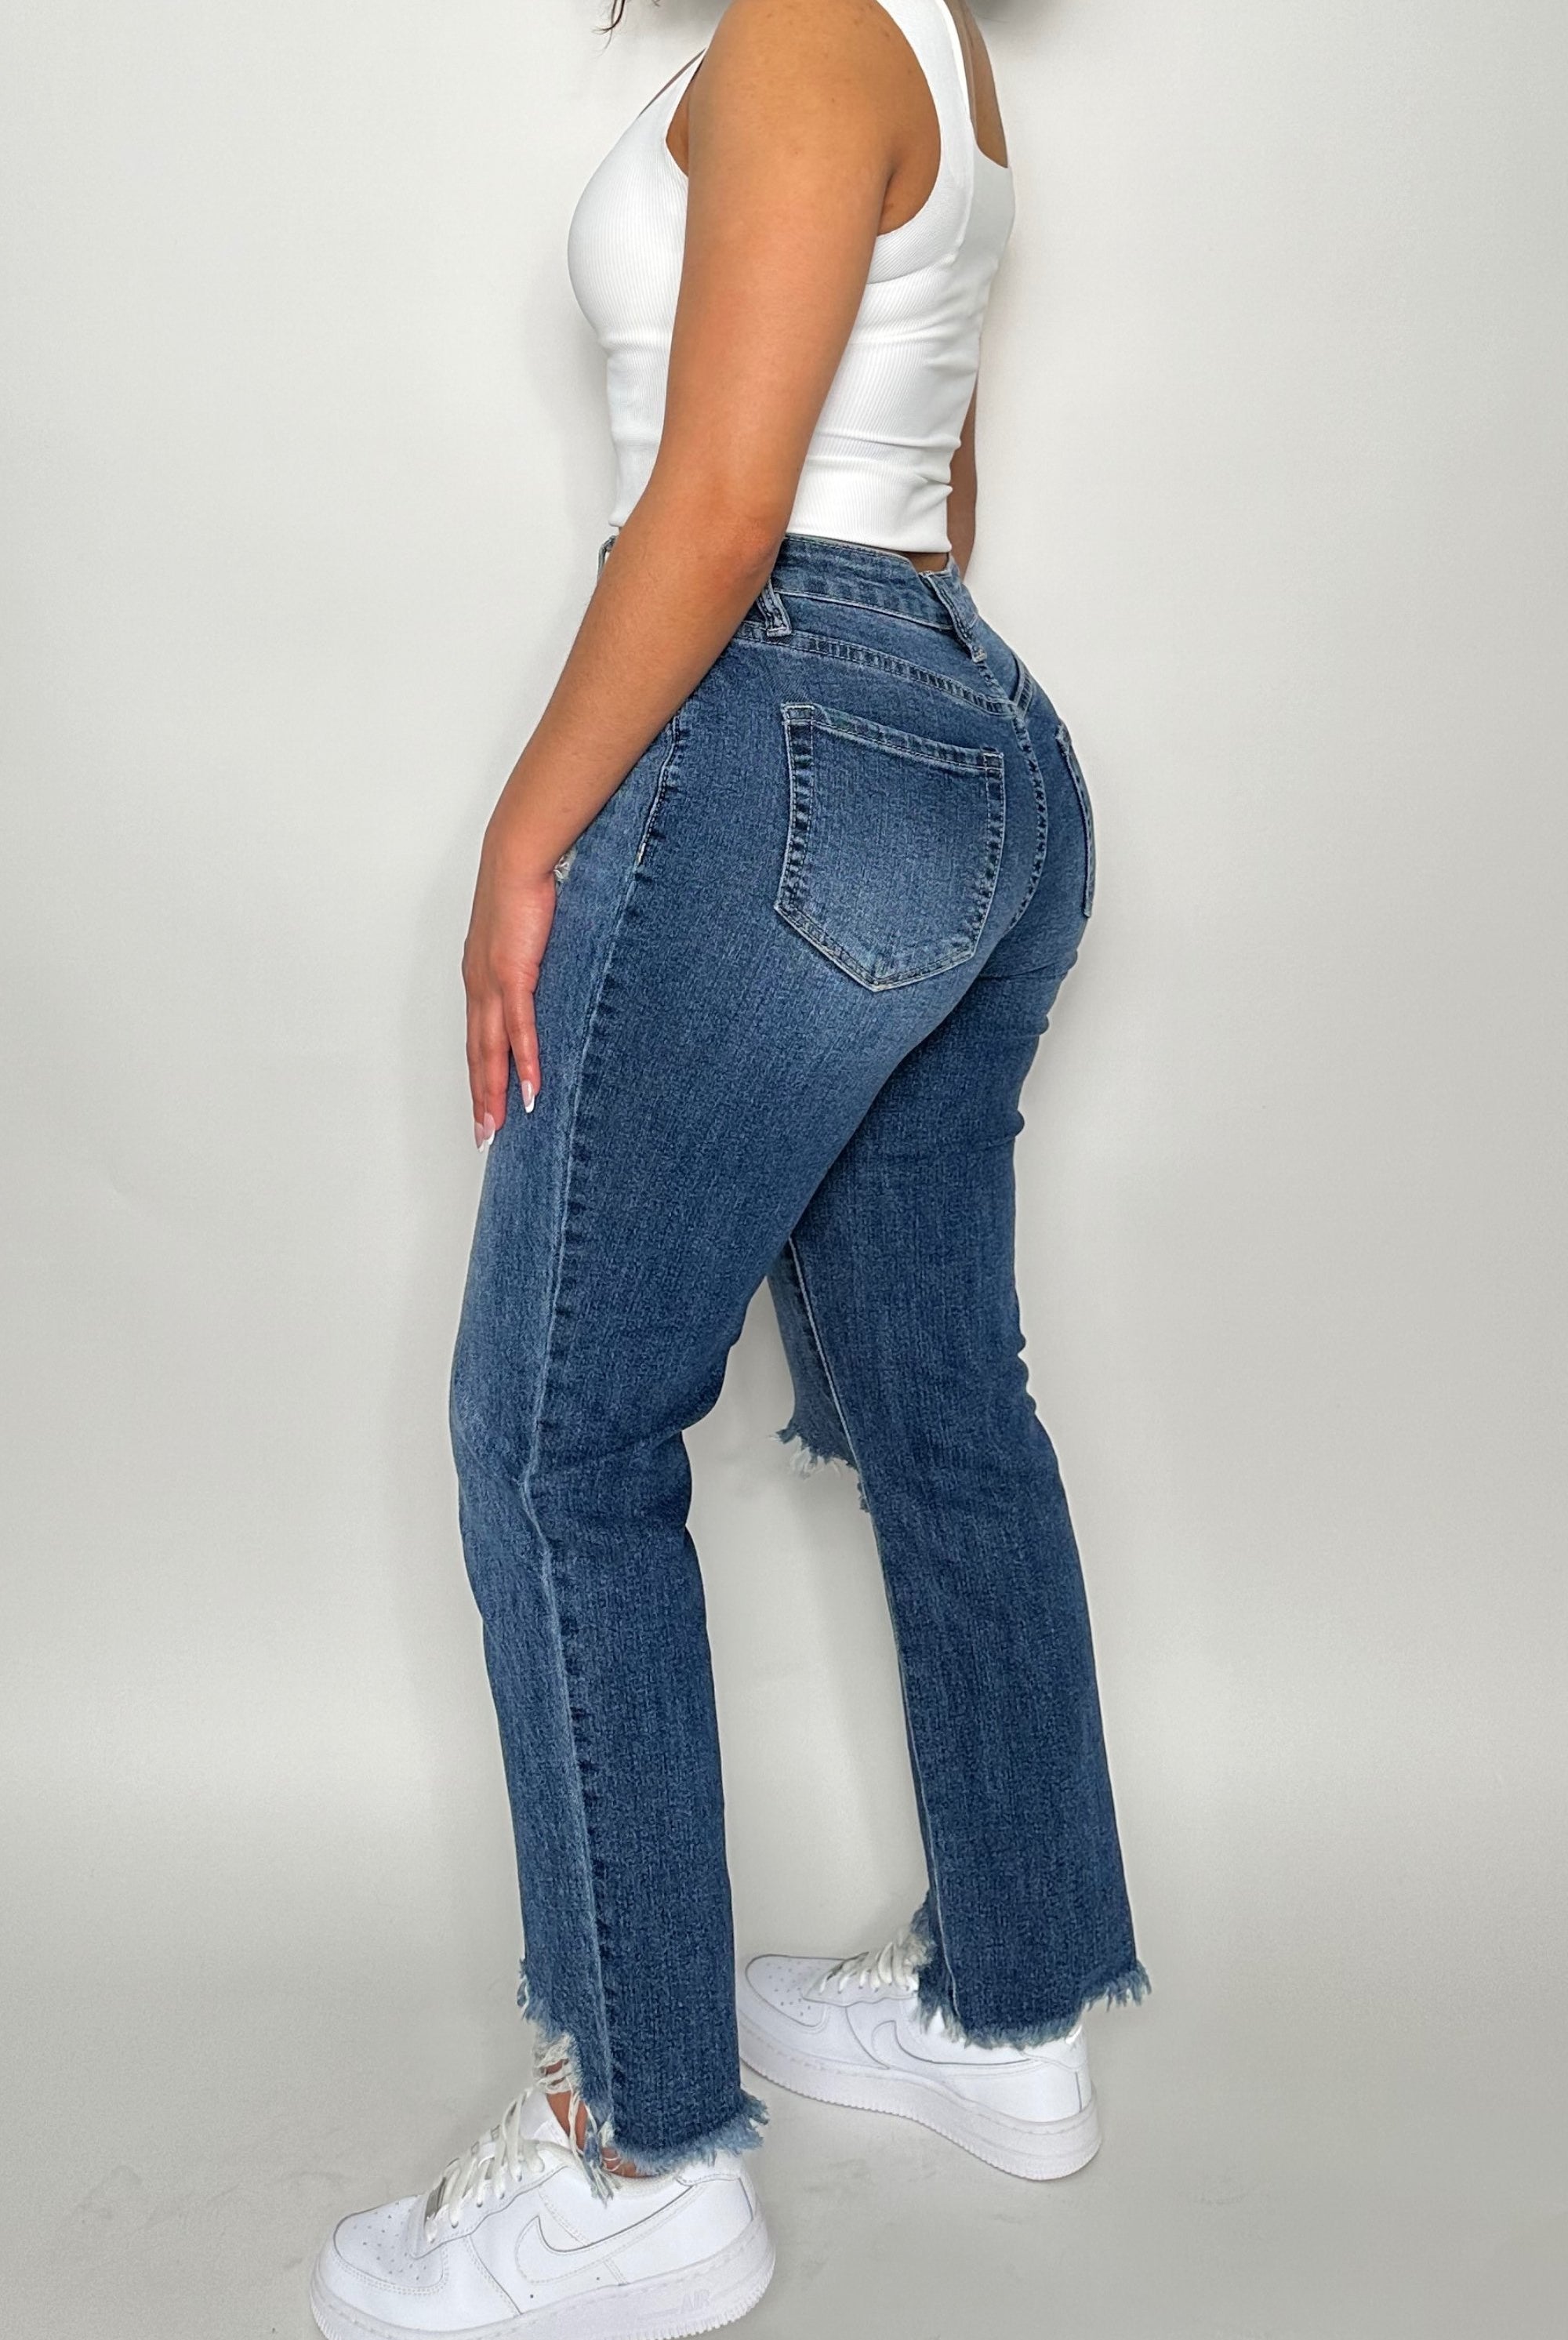 NatxCustomStyle Jeans  | Relaxed Jean | Frayed Slim Straight Jean